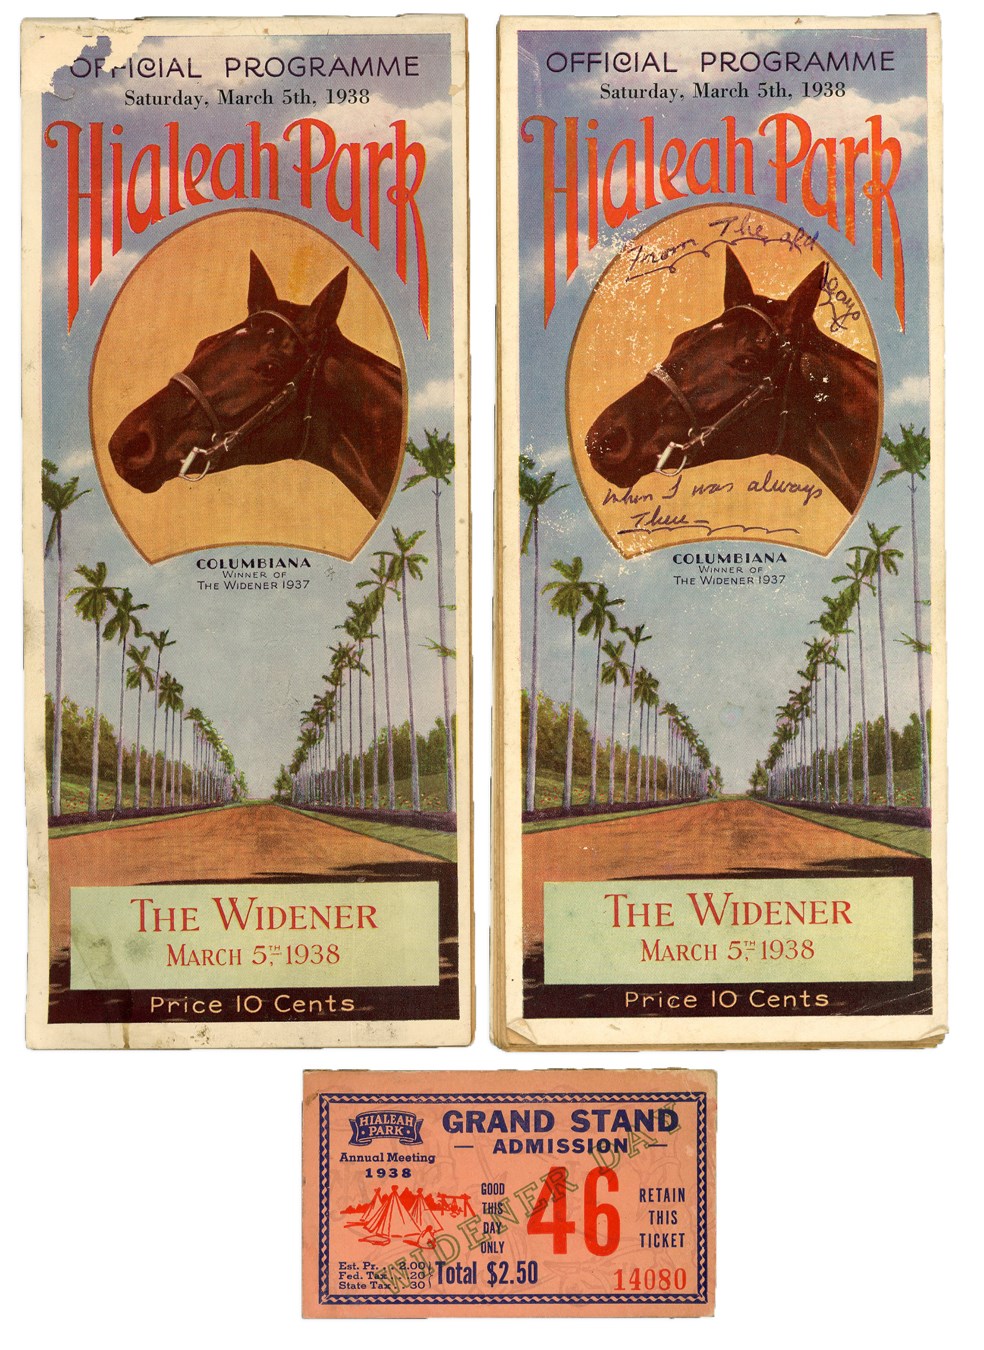 1938 War Admiral "The Widener" Programs and Ticket (3)